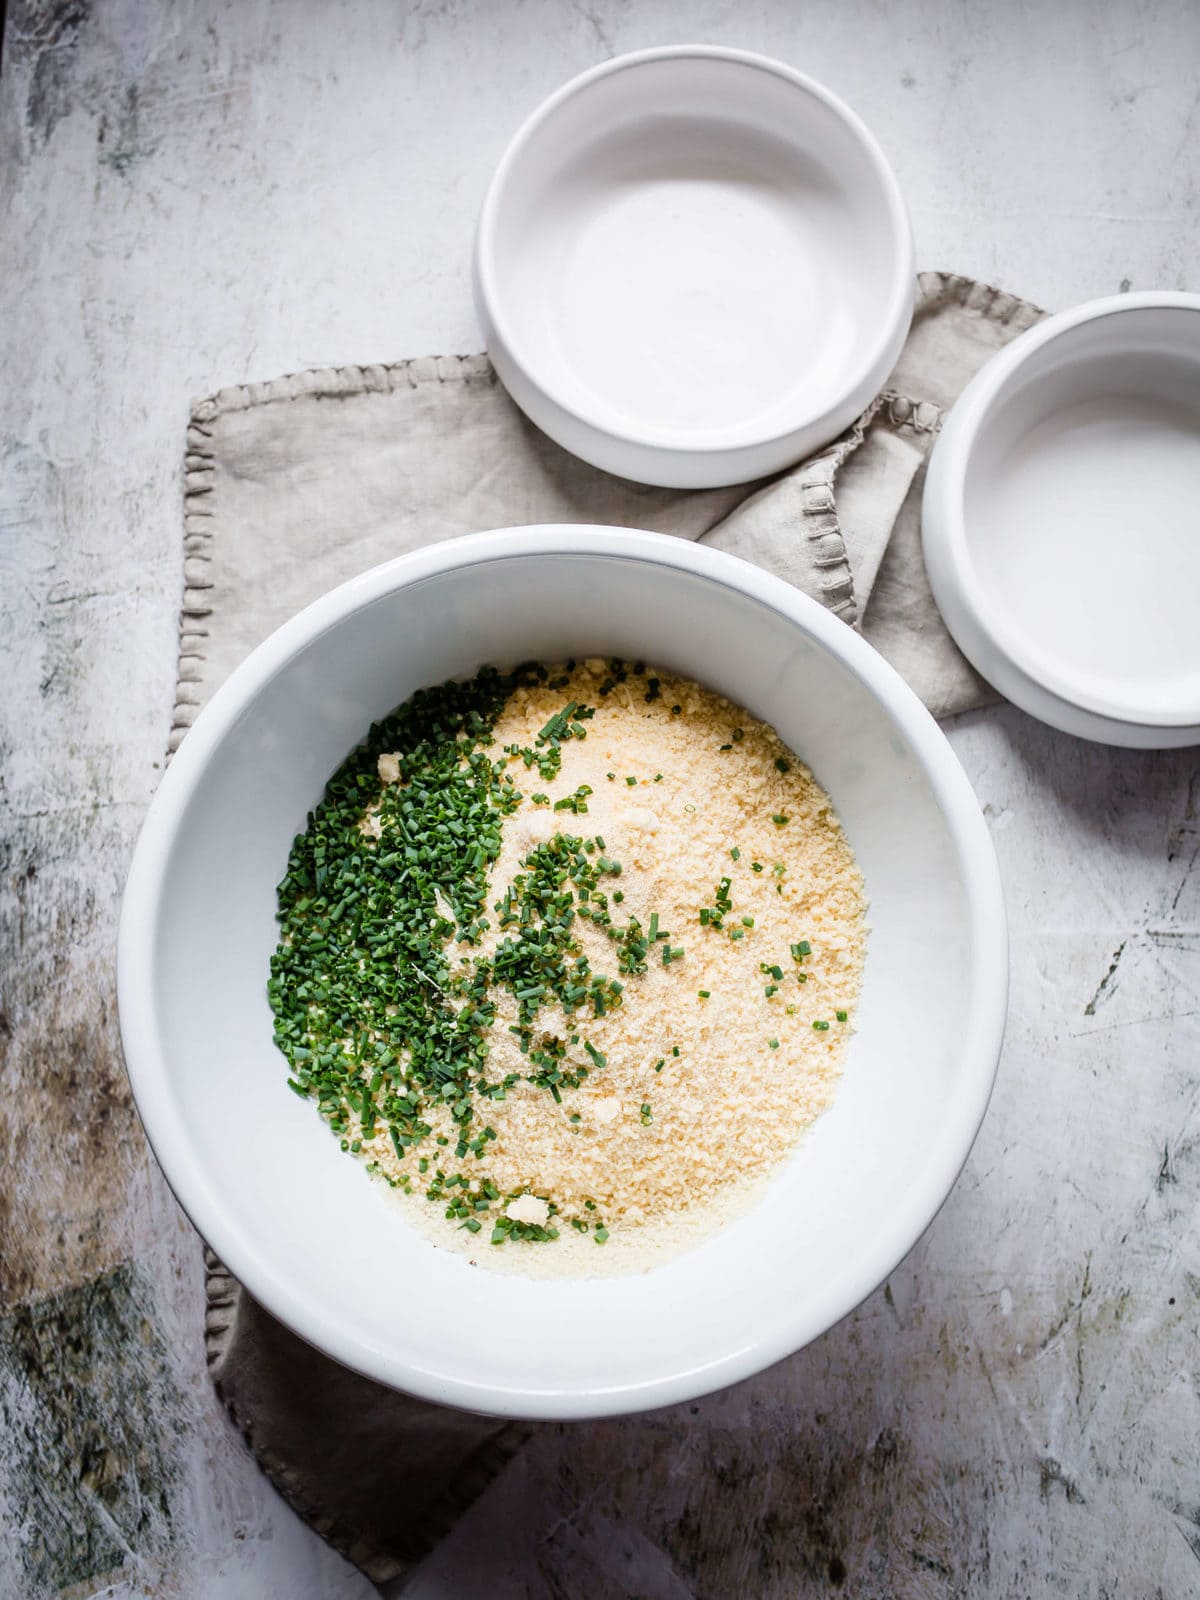 A mixing bowl with almond flour, grated parmesan cheese, garlic powder and chopped fresh chives.